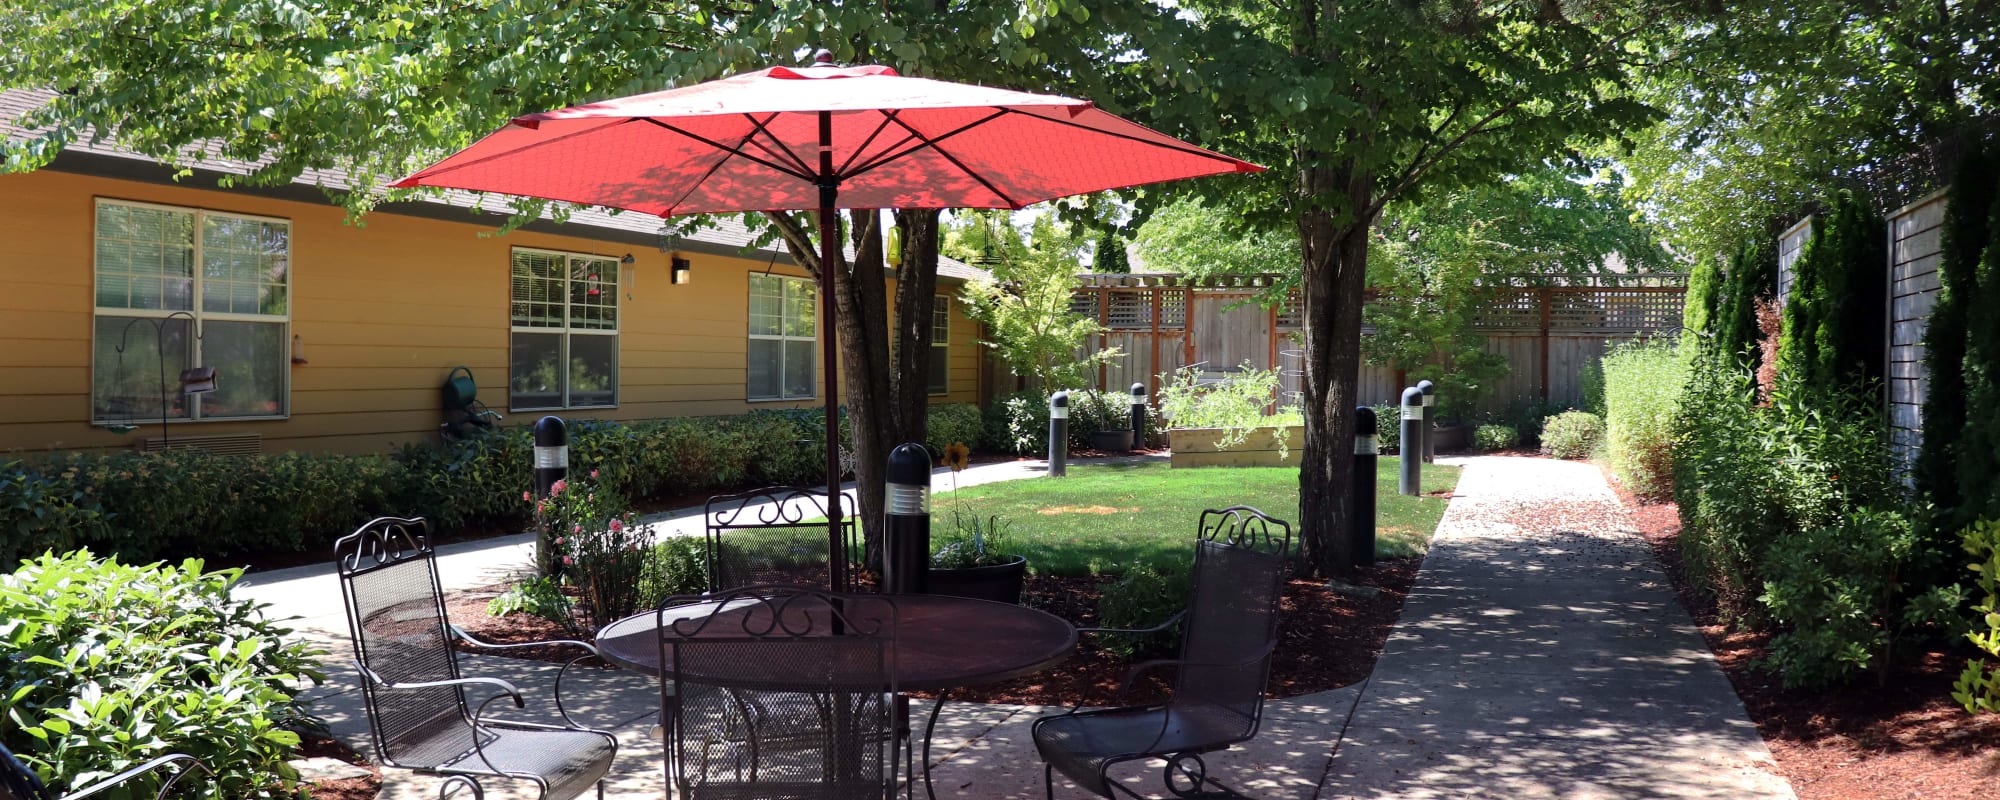 Porch area outside of upscale senior living apartment complete with patio seating and red umbrella at The Springs at Willowcreek senior living in Salem, Oregon